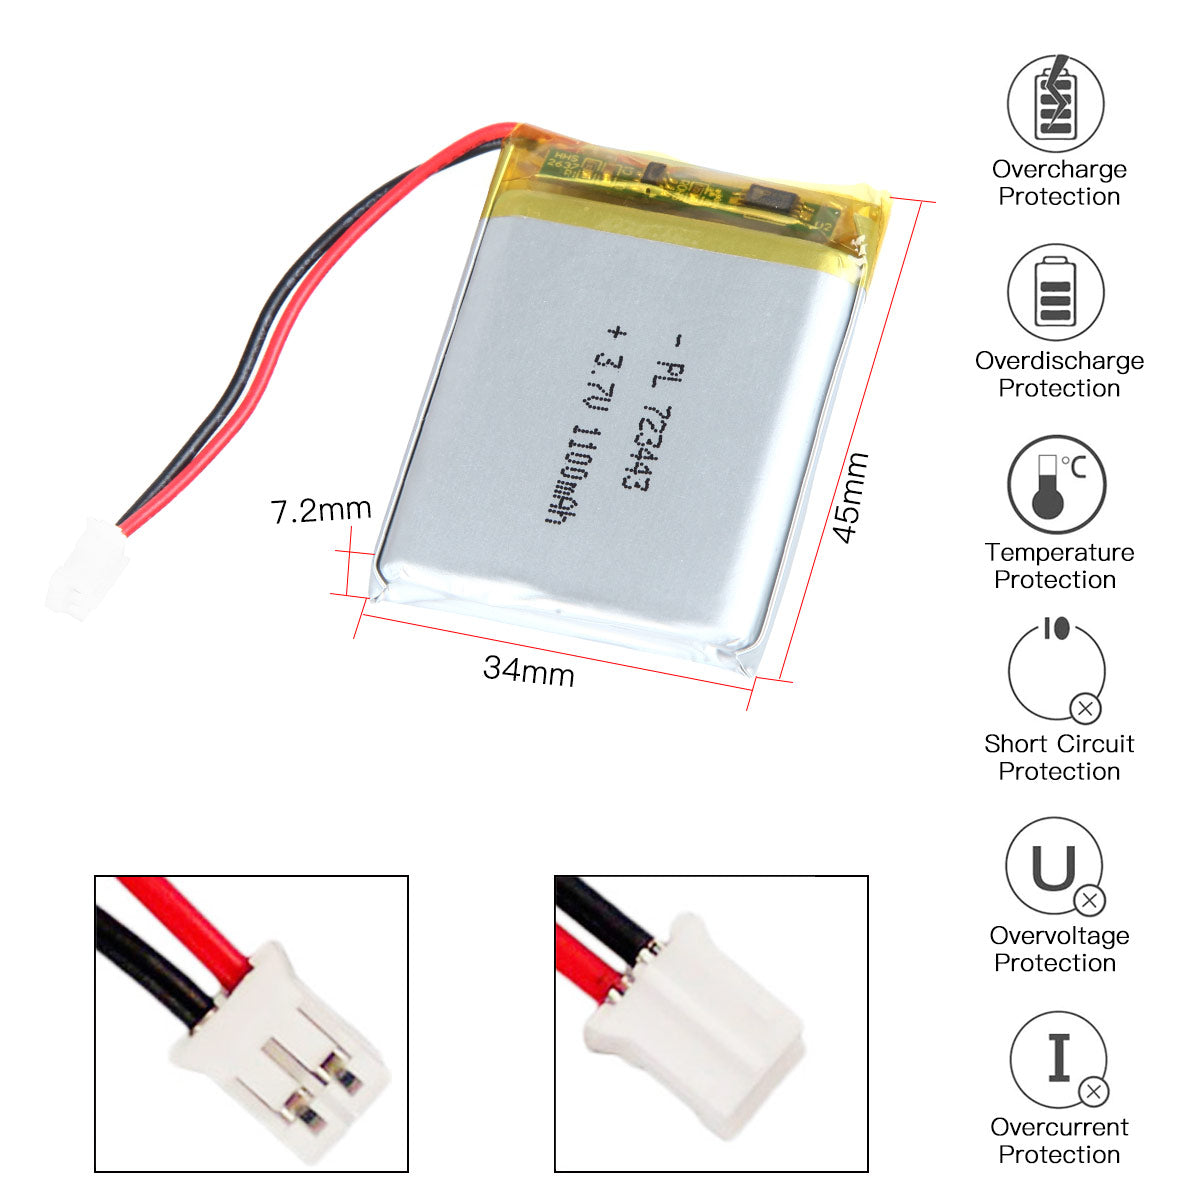 YDL 3.7V 1100mAh 723443 Rechargeable Lithium Polymer Battery Length 45mm